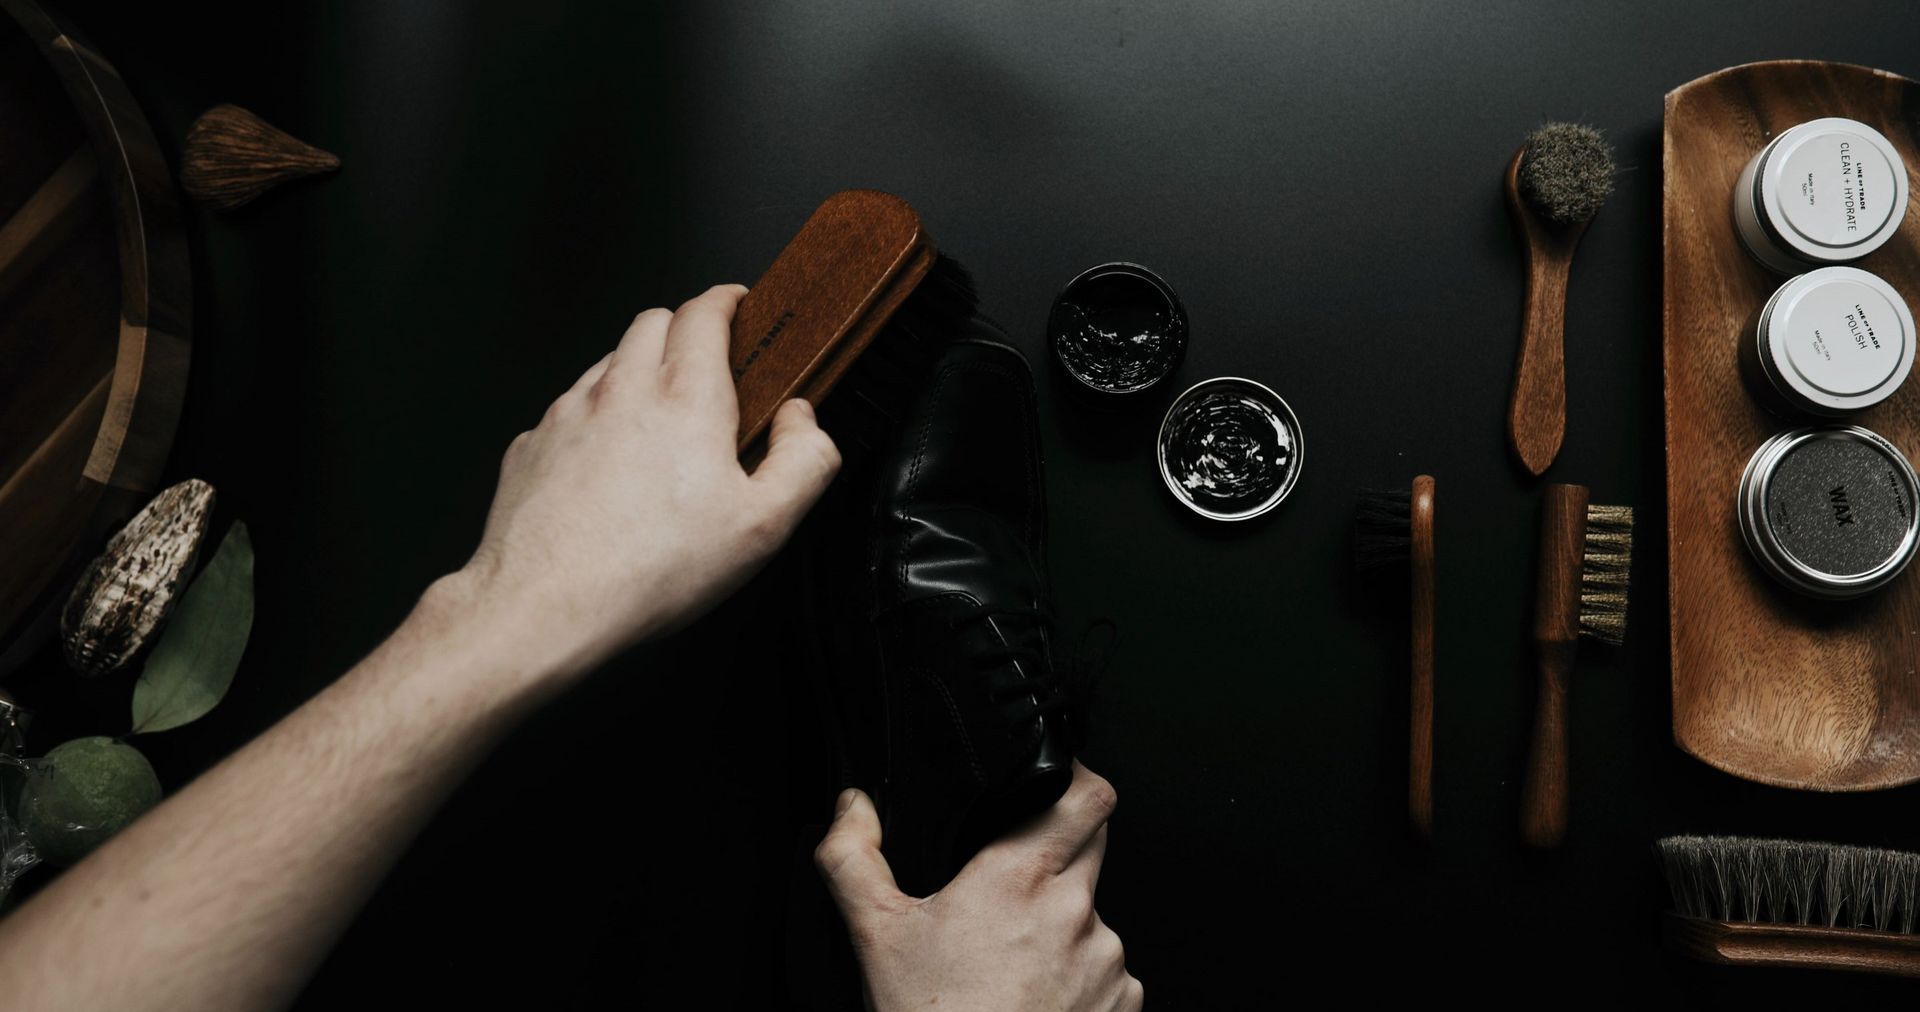 shoe polish, brushes and leather conditioner keeping safety boots clean to improve durability